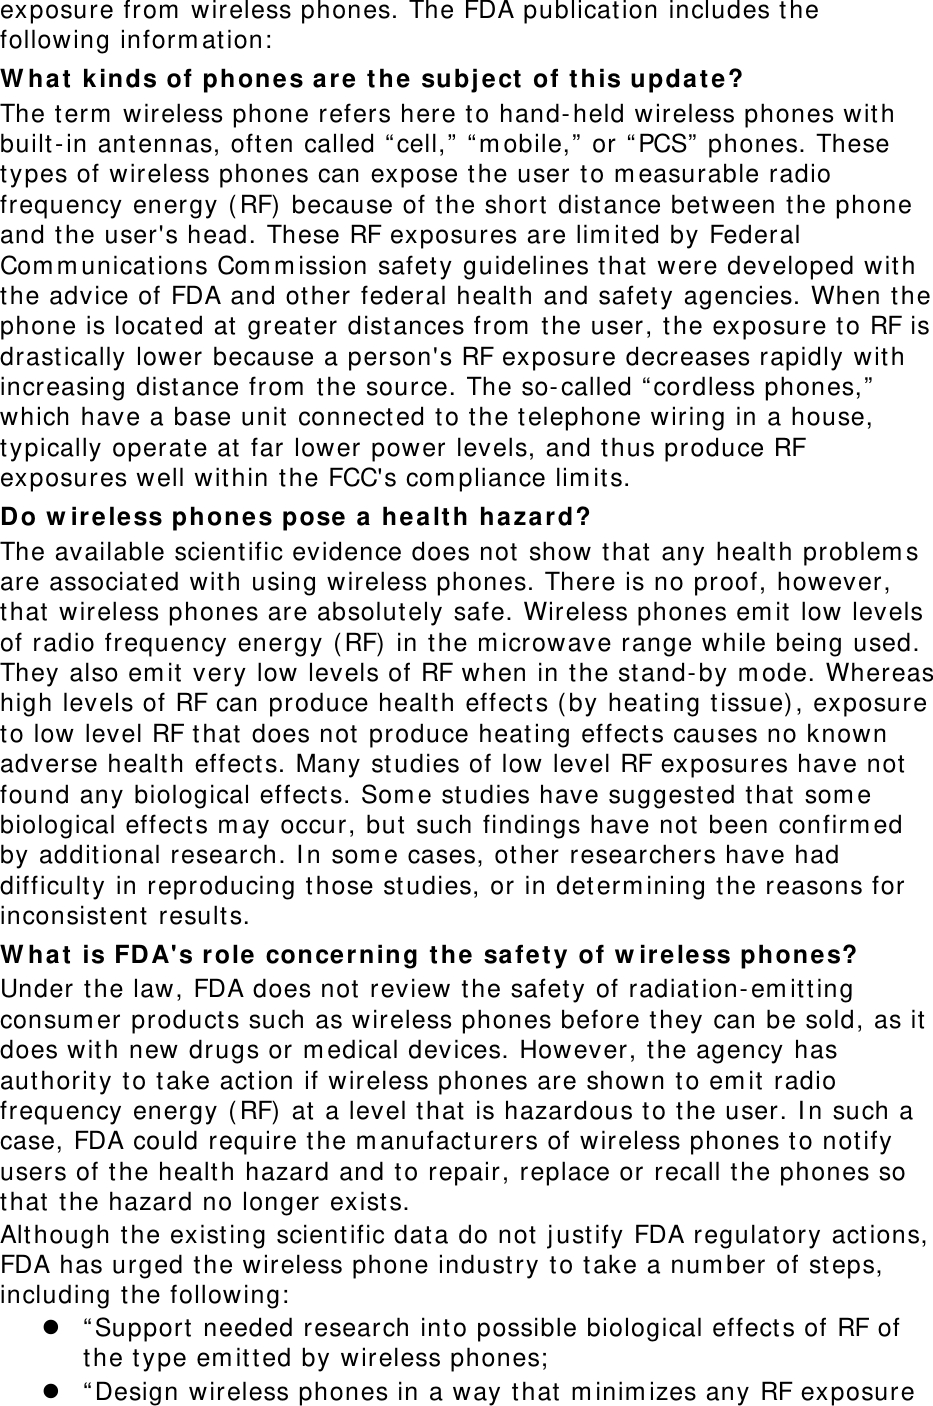   exposure from  wireless phones. The FDA publication includes t he following inform at ion:  W ha t kinds of phones a re  the subj ect  of t his update? The t erm  wireless phone refers here t o hand-held wireless phones with built-in ant ennas, often called “ cell,”  “ m obile,”  or “ PCS”  phones. These types of wireless phones can expose t he user t o m easurable radio frequency energy ( RF) because of t he short  distance bet ween t he phone and the user&apos;s head. These RF exposures are lim ited by Federal Com m unicat ions Com m ission safet y guidelines that  were developed with the advice of FDA and ot her federal healt h and safet y agencies. When t he phone is located at greater distances from  the user, t he exposure t o RF is drast ically lower because a person&apos;s RF exposure decreases rapidly with increasing distance from  the source. The so- called “ cordless phones,”  which have a base unit connect ed to t he telephone wiring in a house, typically operate at far lower power levels, and t hus produce RF exposures well wit hin the FCC&apos;s com pliance lim its. Do w ir ele ss phone s pose a  healt h hazard? The available scient ific evidence does not  show t hat any health problem s are associated wit h using wireless phones. There is no proof, however, that  wireless phones are absolut ely safe. Wireless phones em it  low levels of radio frequency energy ( RF)  in t he m icrowave range while being used. They also em it very low levels of RF when in t he st and- by m ode. Whereas high levels of RF can produce health effect s ( by heating t issue) , exposure to low level RF t hat does not produce heating effect s causes no known adverse healt h effect s. Many studies of low level RF exposures have not found any biological effect s. Som e studies have suggest ed t hat som e biological effect s m ay occur, but  such findings have not  been confirm ed by additional research. I n som e cases, other researchers have had difficult y in reproducing those st udies, or in det erm ining t he reasons for inconsist ent results. W ha t is FDA&apos;s r ole conce rning t he sa fet y of w ir ele ss phone s? Under the law, FDA does not review the safet y of radiat ion- em itt ing consum er product s such as wireless phones before t hey can be sold, as it does wit h new drugs or m edical devices. However, the agency has aut hority to t ake act ion if wireless phones are shown t o em it radio frequency energy ( RF) at a level that is hazardous t o t he user. I n such a case, FDA could require t he m anufact urers of wireless phones t o notify users of the health hazard and t o repair, replace or recall t he phones so that  t he hazard no longer exists. Alt hough t he existing scient ific dat a do not  j ust ify FDA regulat ory act ions, FDA has urged t he wireless phone indust ry to take a num ber of st eps, including t he following:  z “ Support  needed research int o possible biological effect s of RF of the type em itt ed by wireless phones;  z “ Design wireless phones in a way t hat m inim izes any RF exposure 